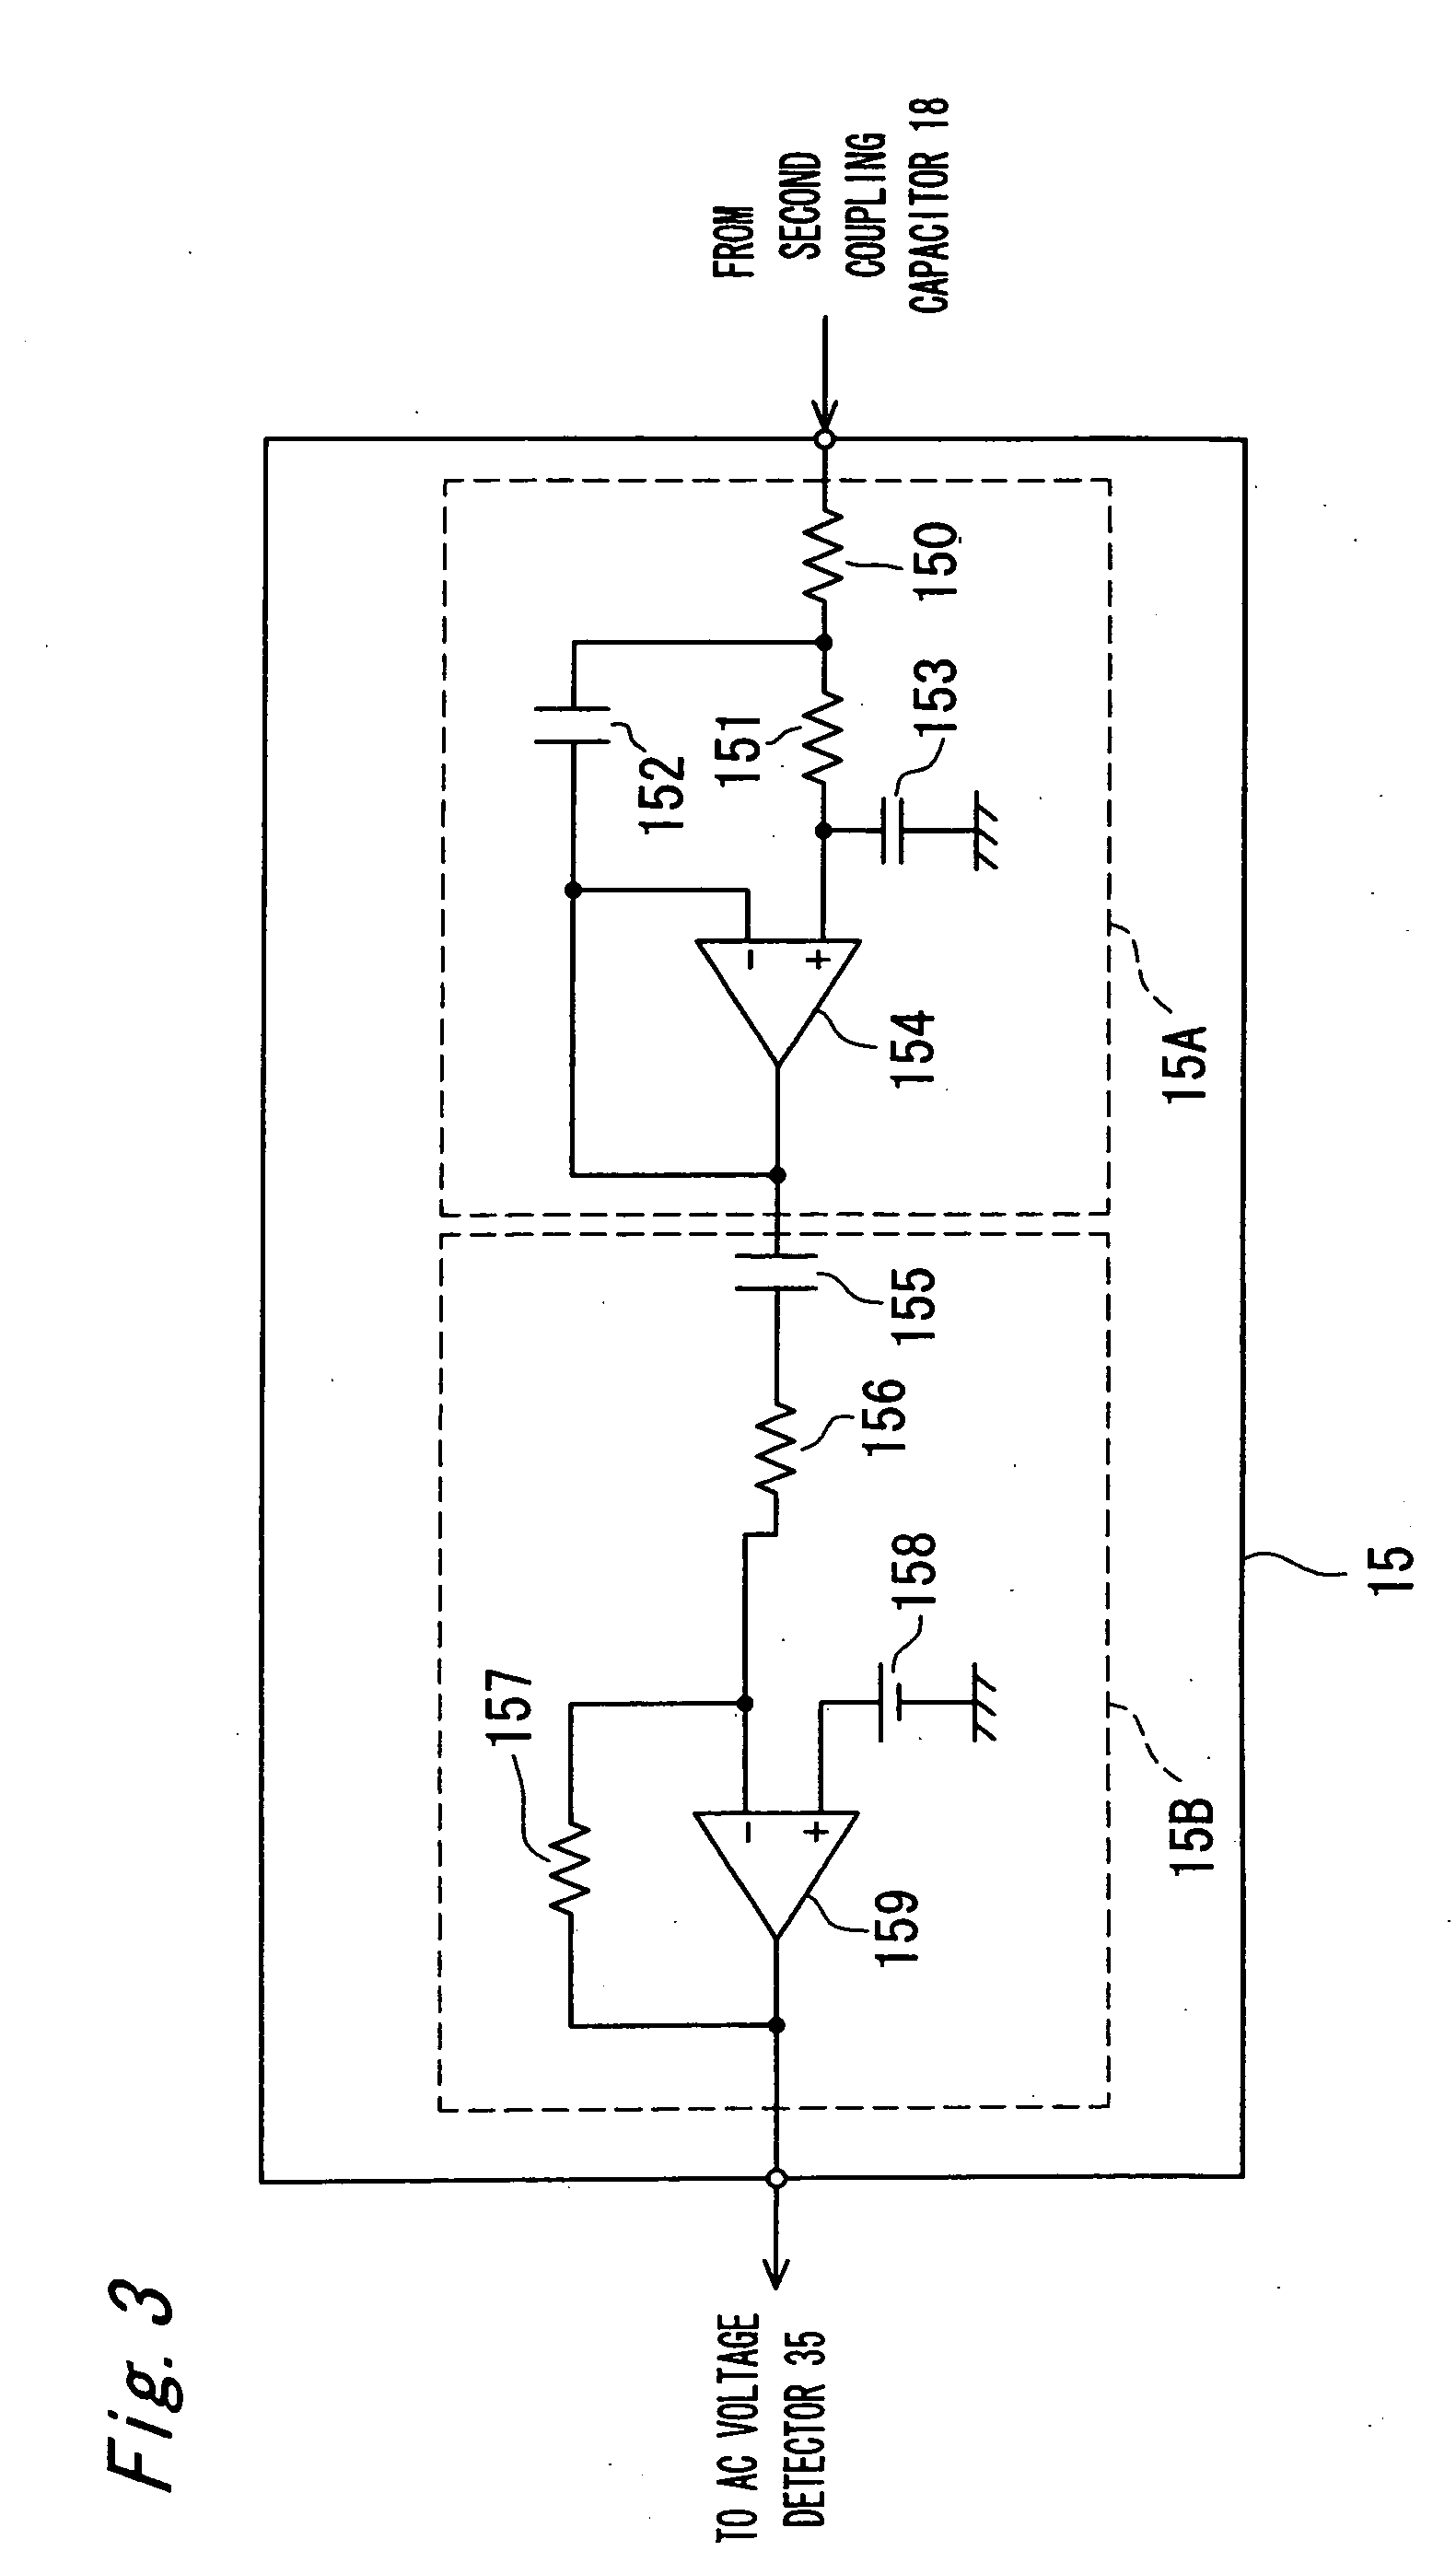 Power supply controller apparatus for detecting welding of contactors